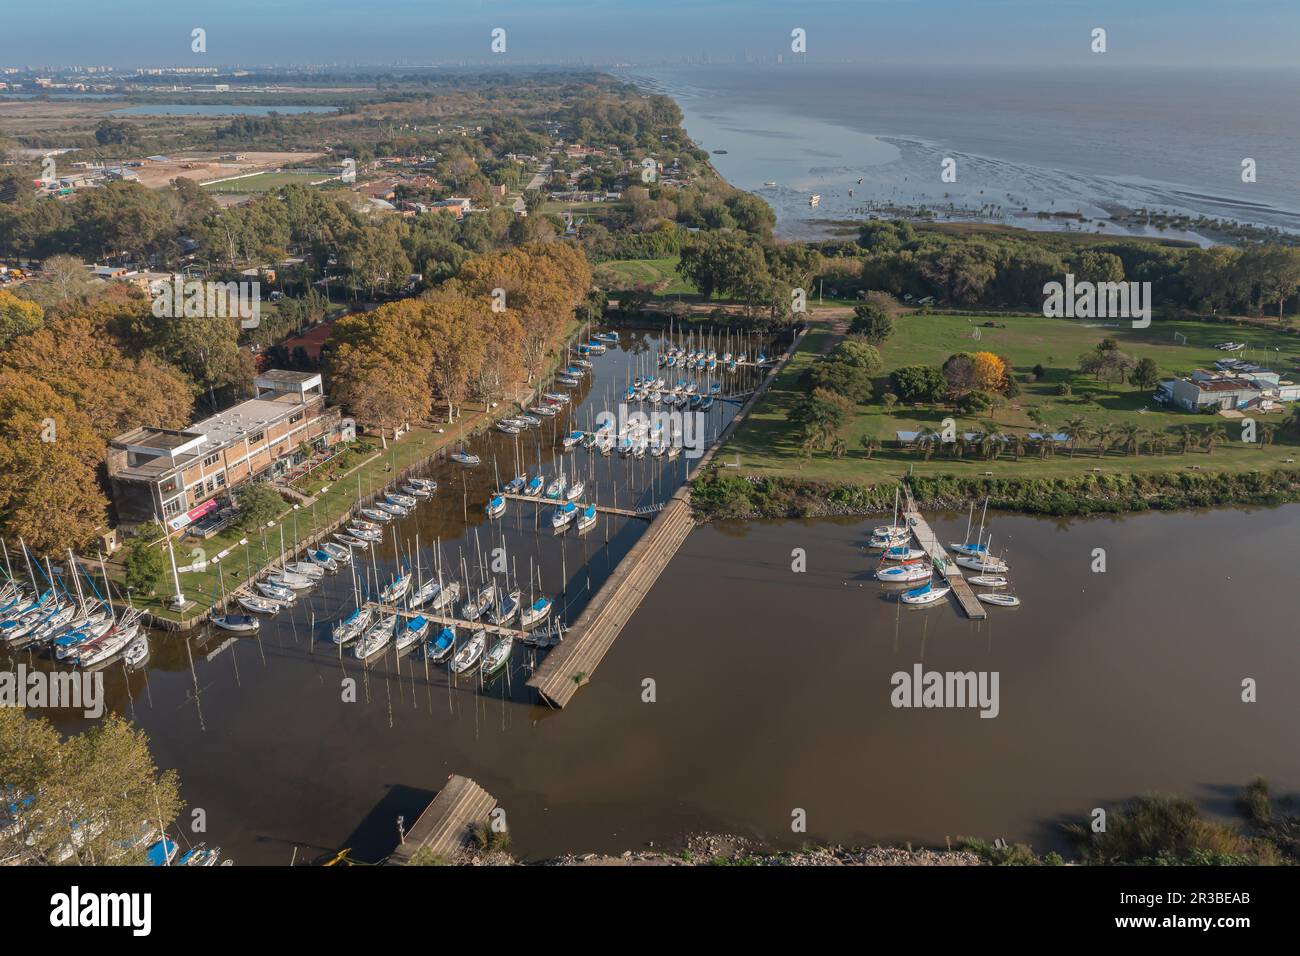 Sailboats docked at a pier on the coast of the Rio de la Plata in the city of Quilmes. Stock Photo